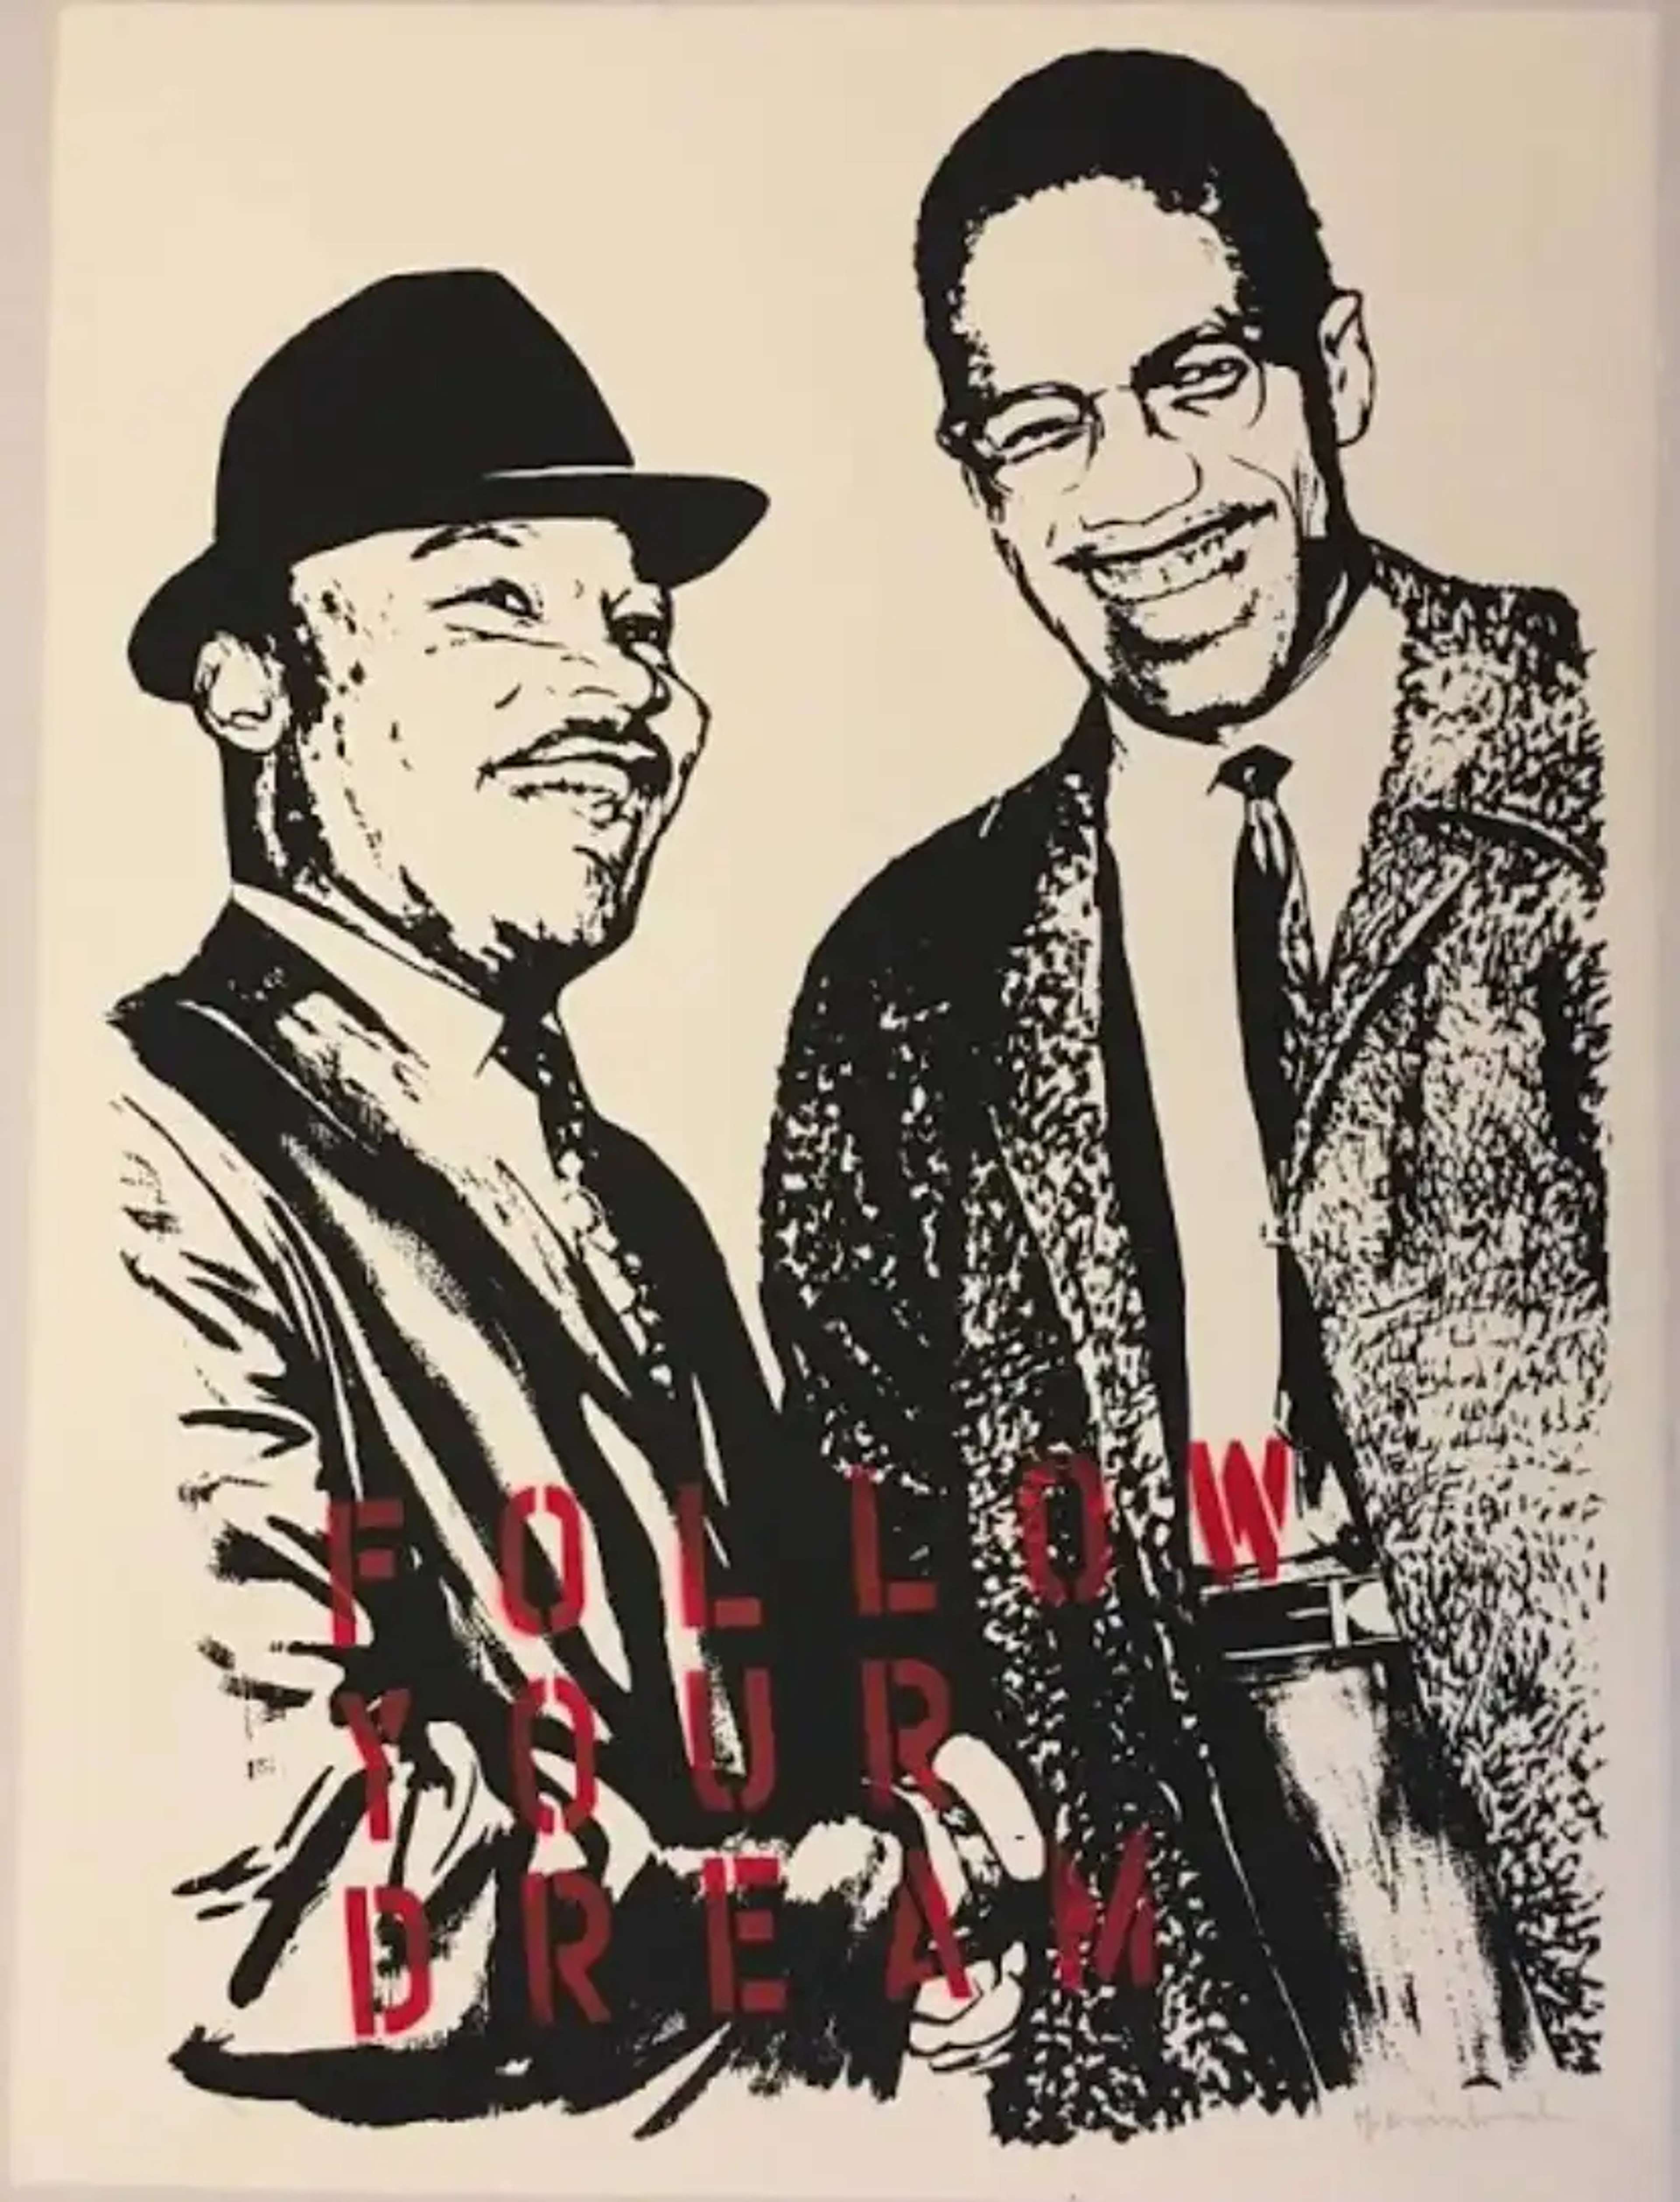 A screenprint featuring black American activists Martin Luther King Jr. and Malcolm X smiling in conversation. The words 'FOLLOW YOUR DREAM' are stenciled in red on the lower portion of the artwork.